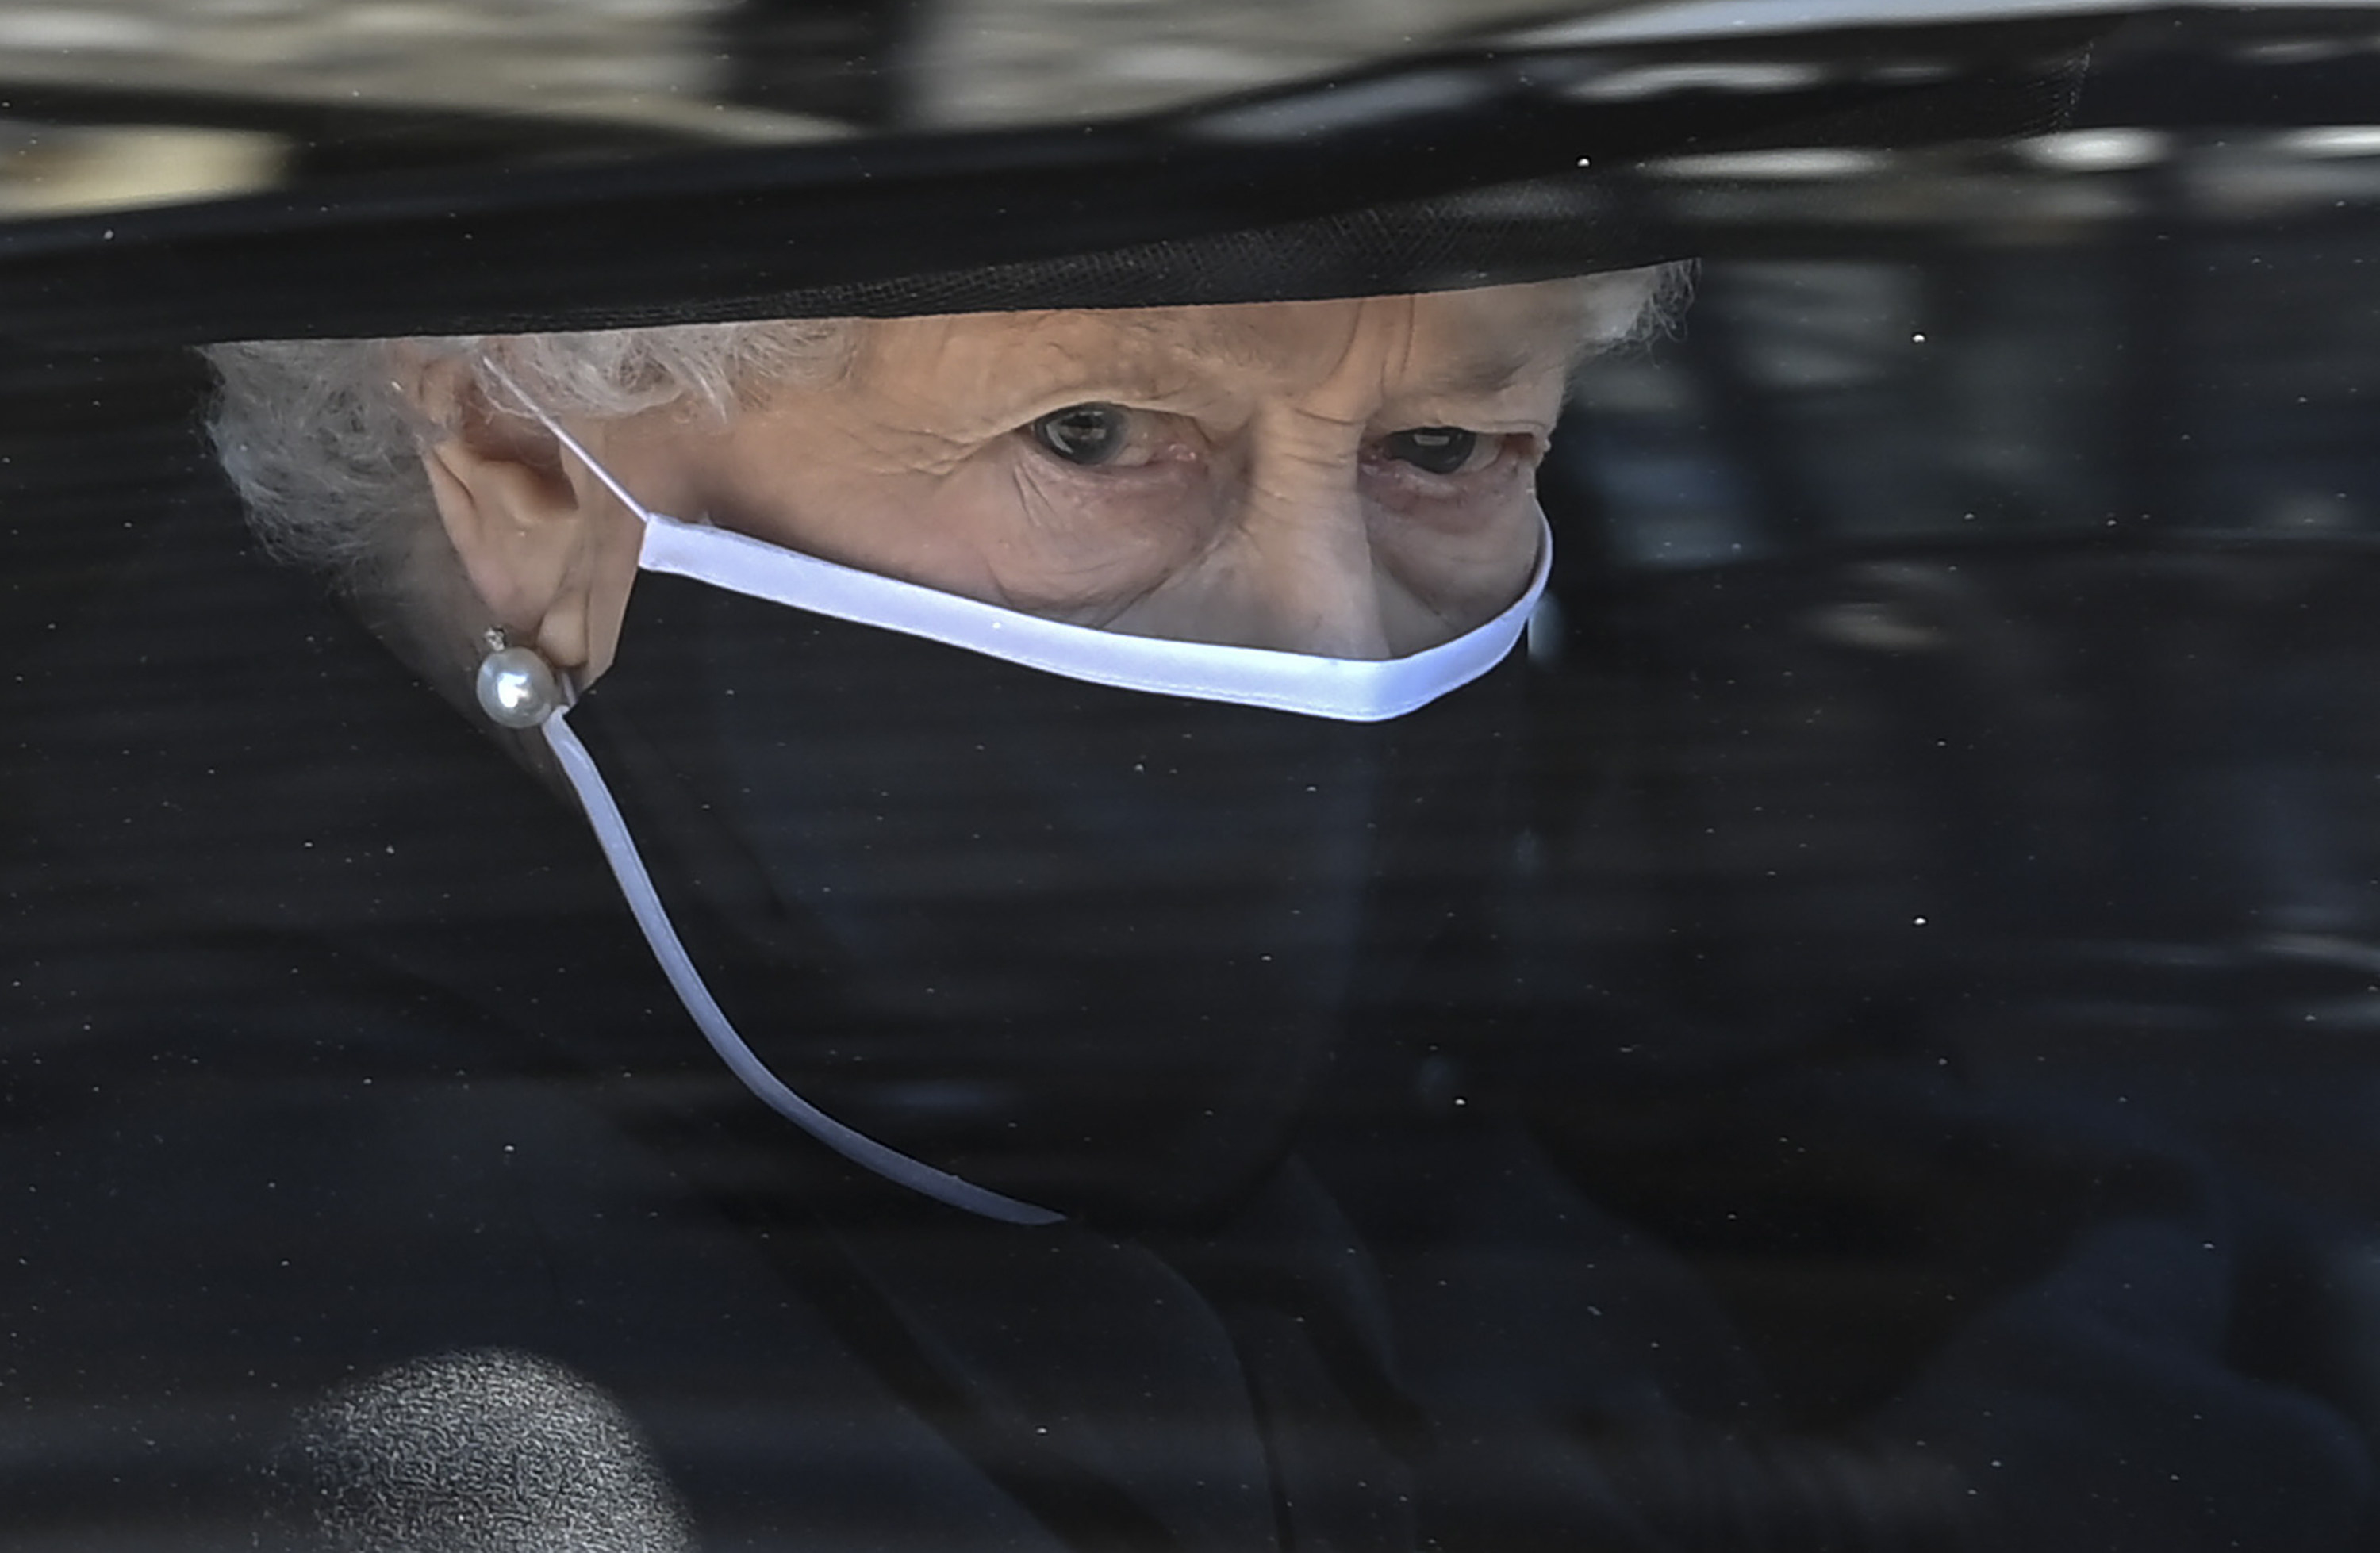 The queen in black in a mask seen looking out from a car window